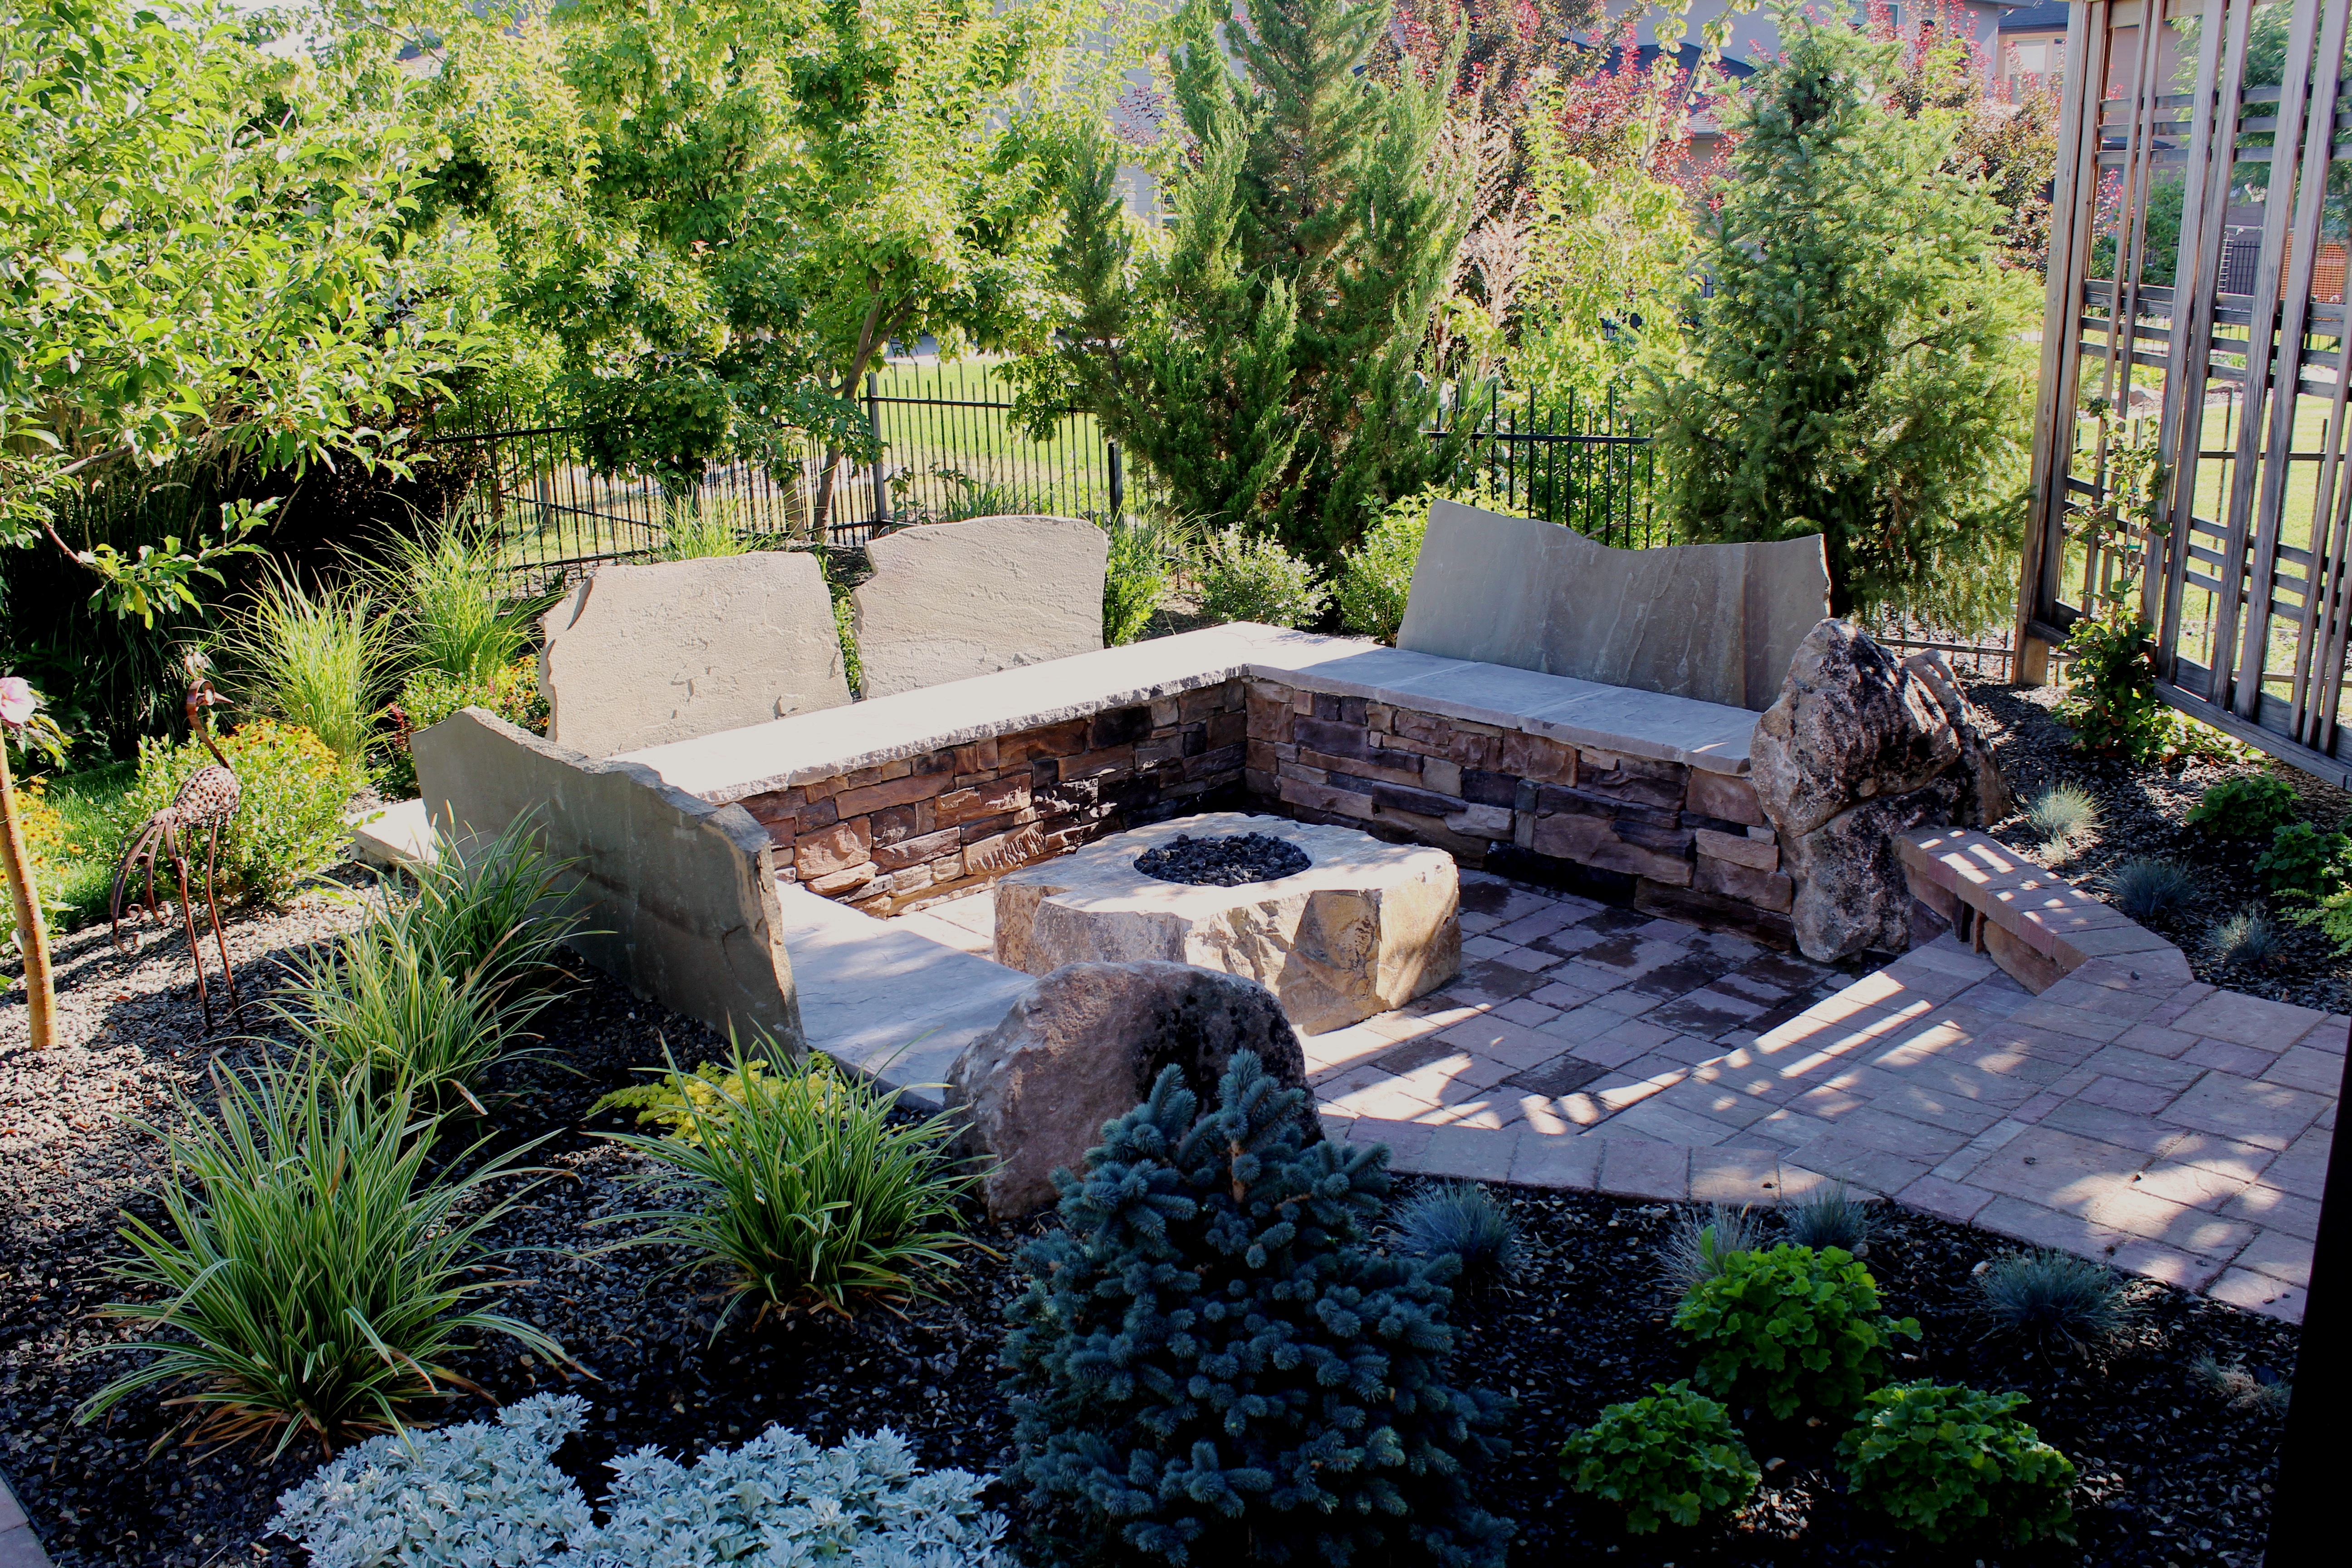 Sunken Firepit with Stone Benches | The Garden Artist Boise, ID